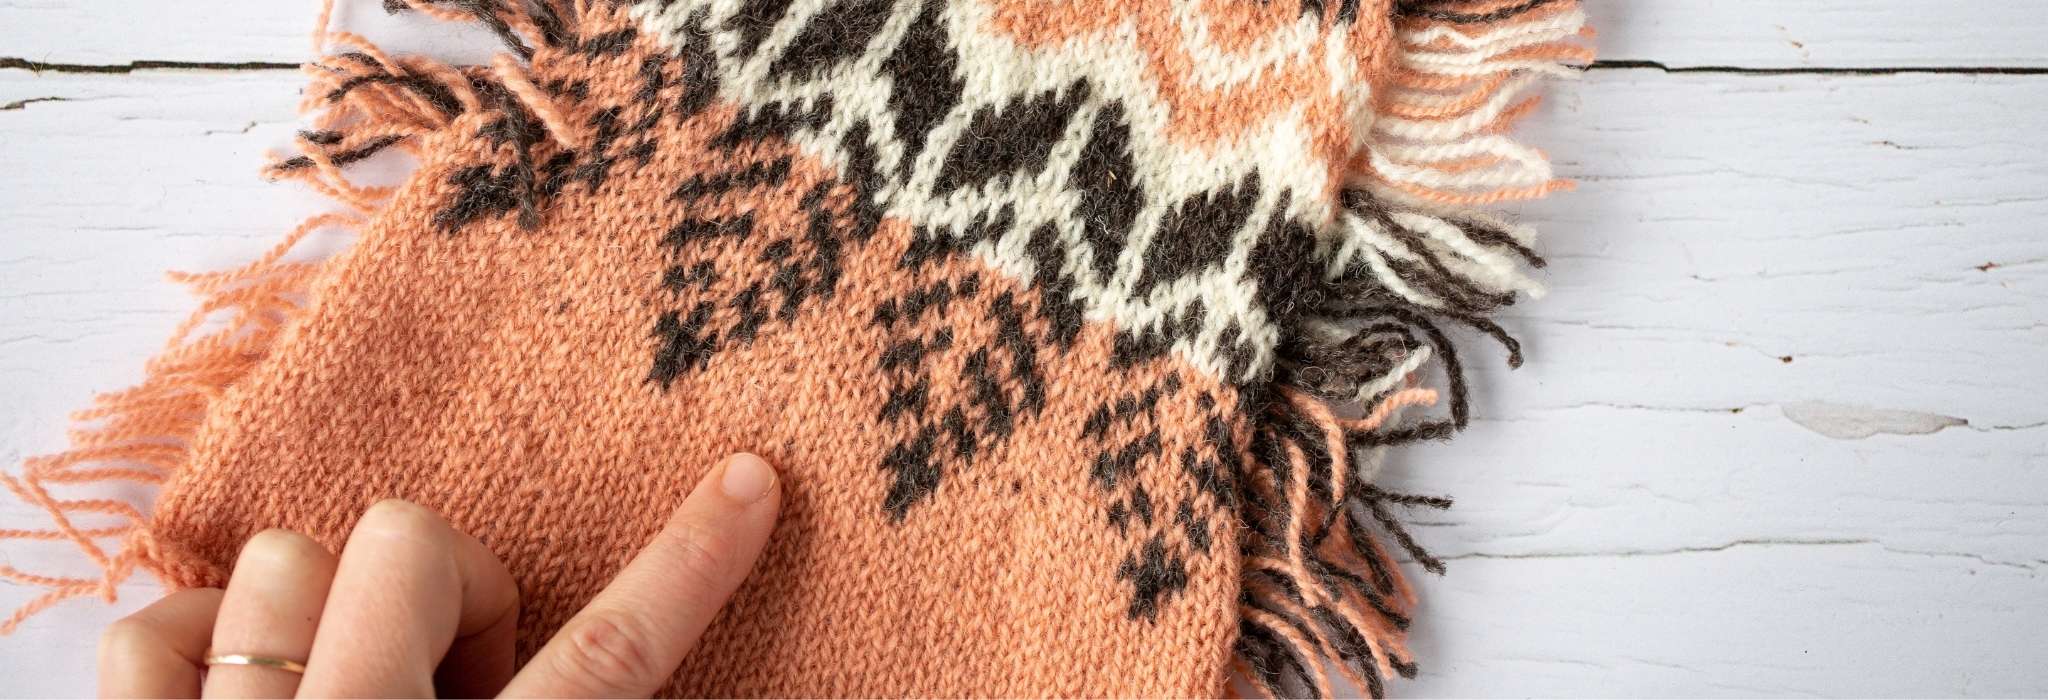 a coral peach, brown and white piece of colourwork knitting, laying on a flat pale surface with fingers of a left hand touching it from the bottom